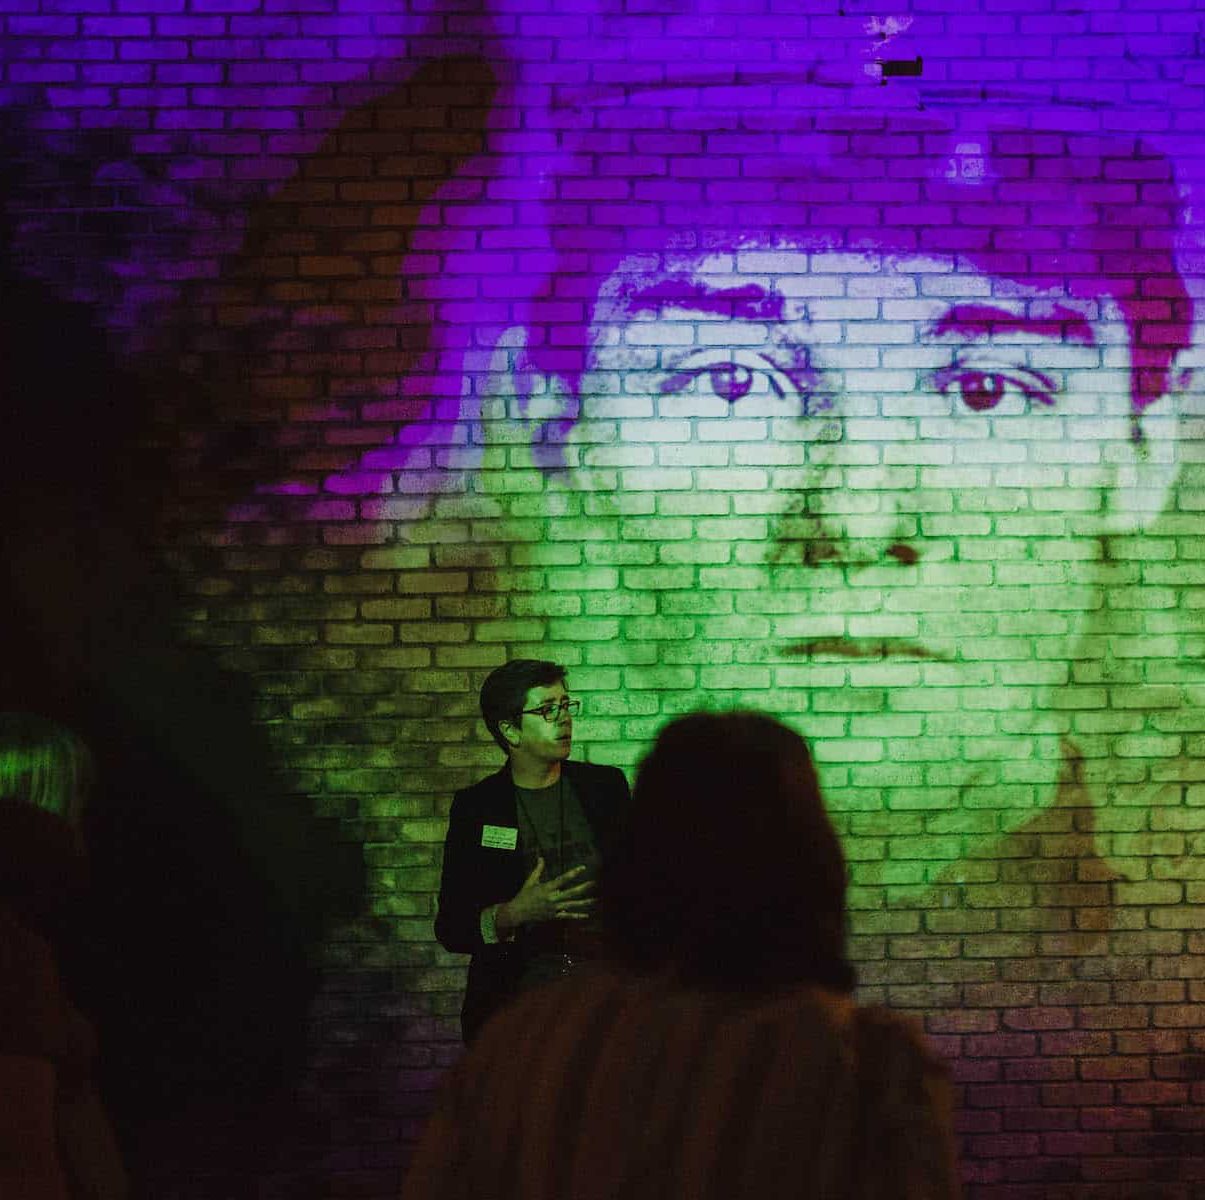 A young man in his civil war uniform projected onto the museum wall.